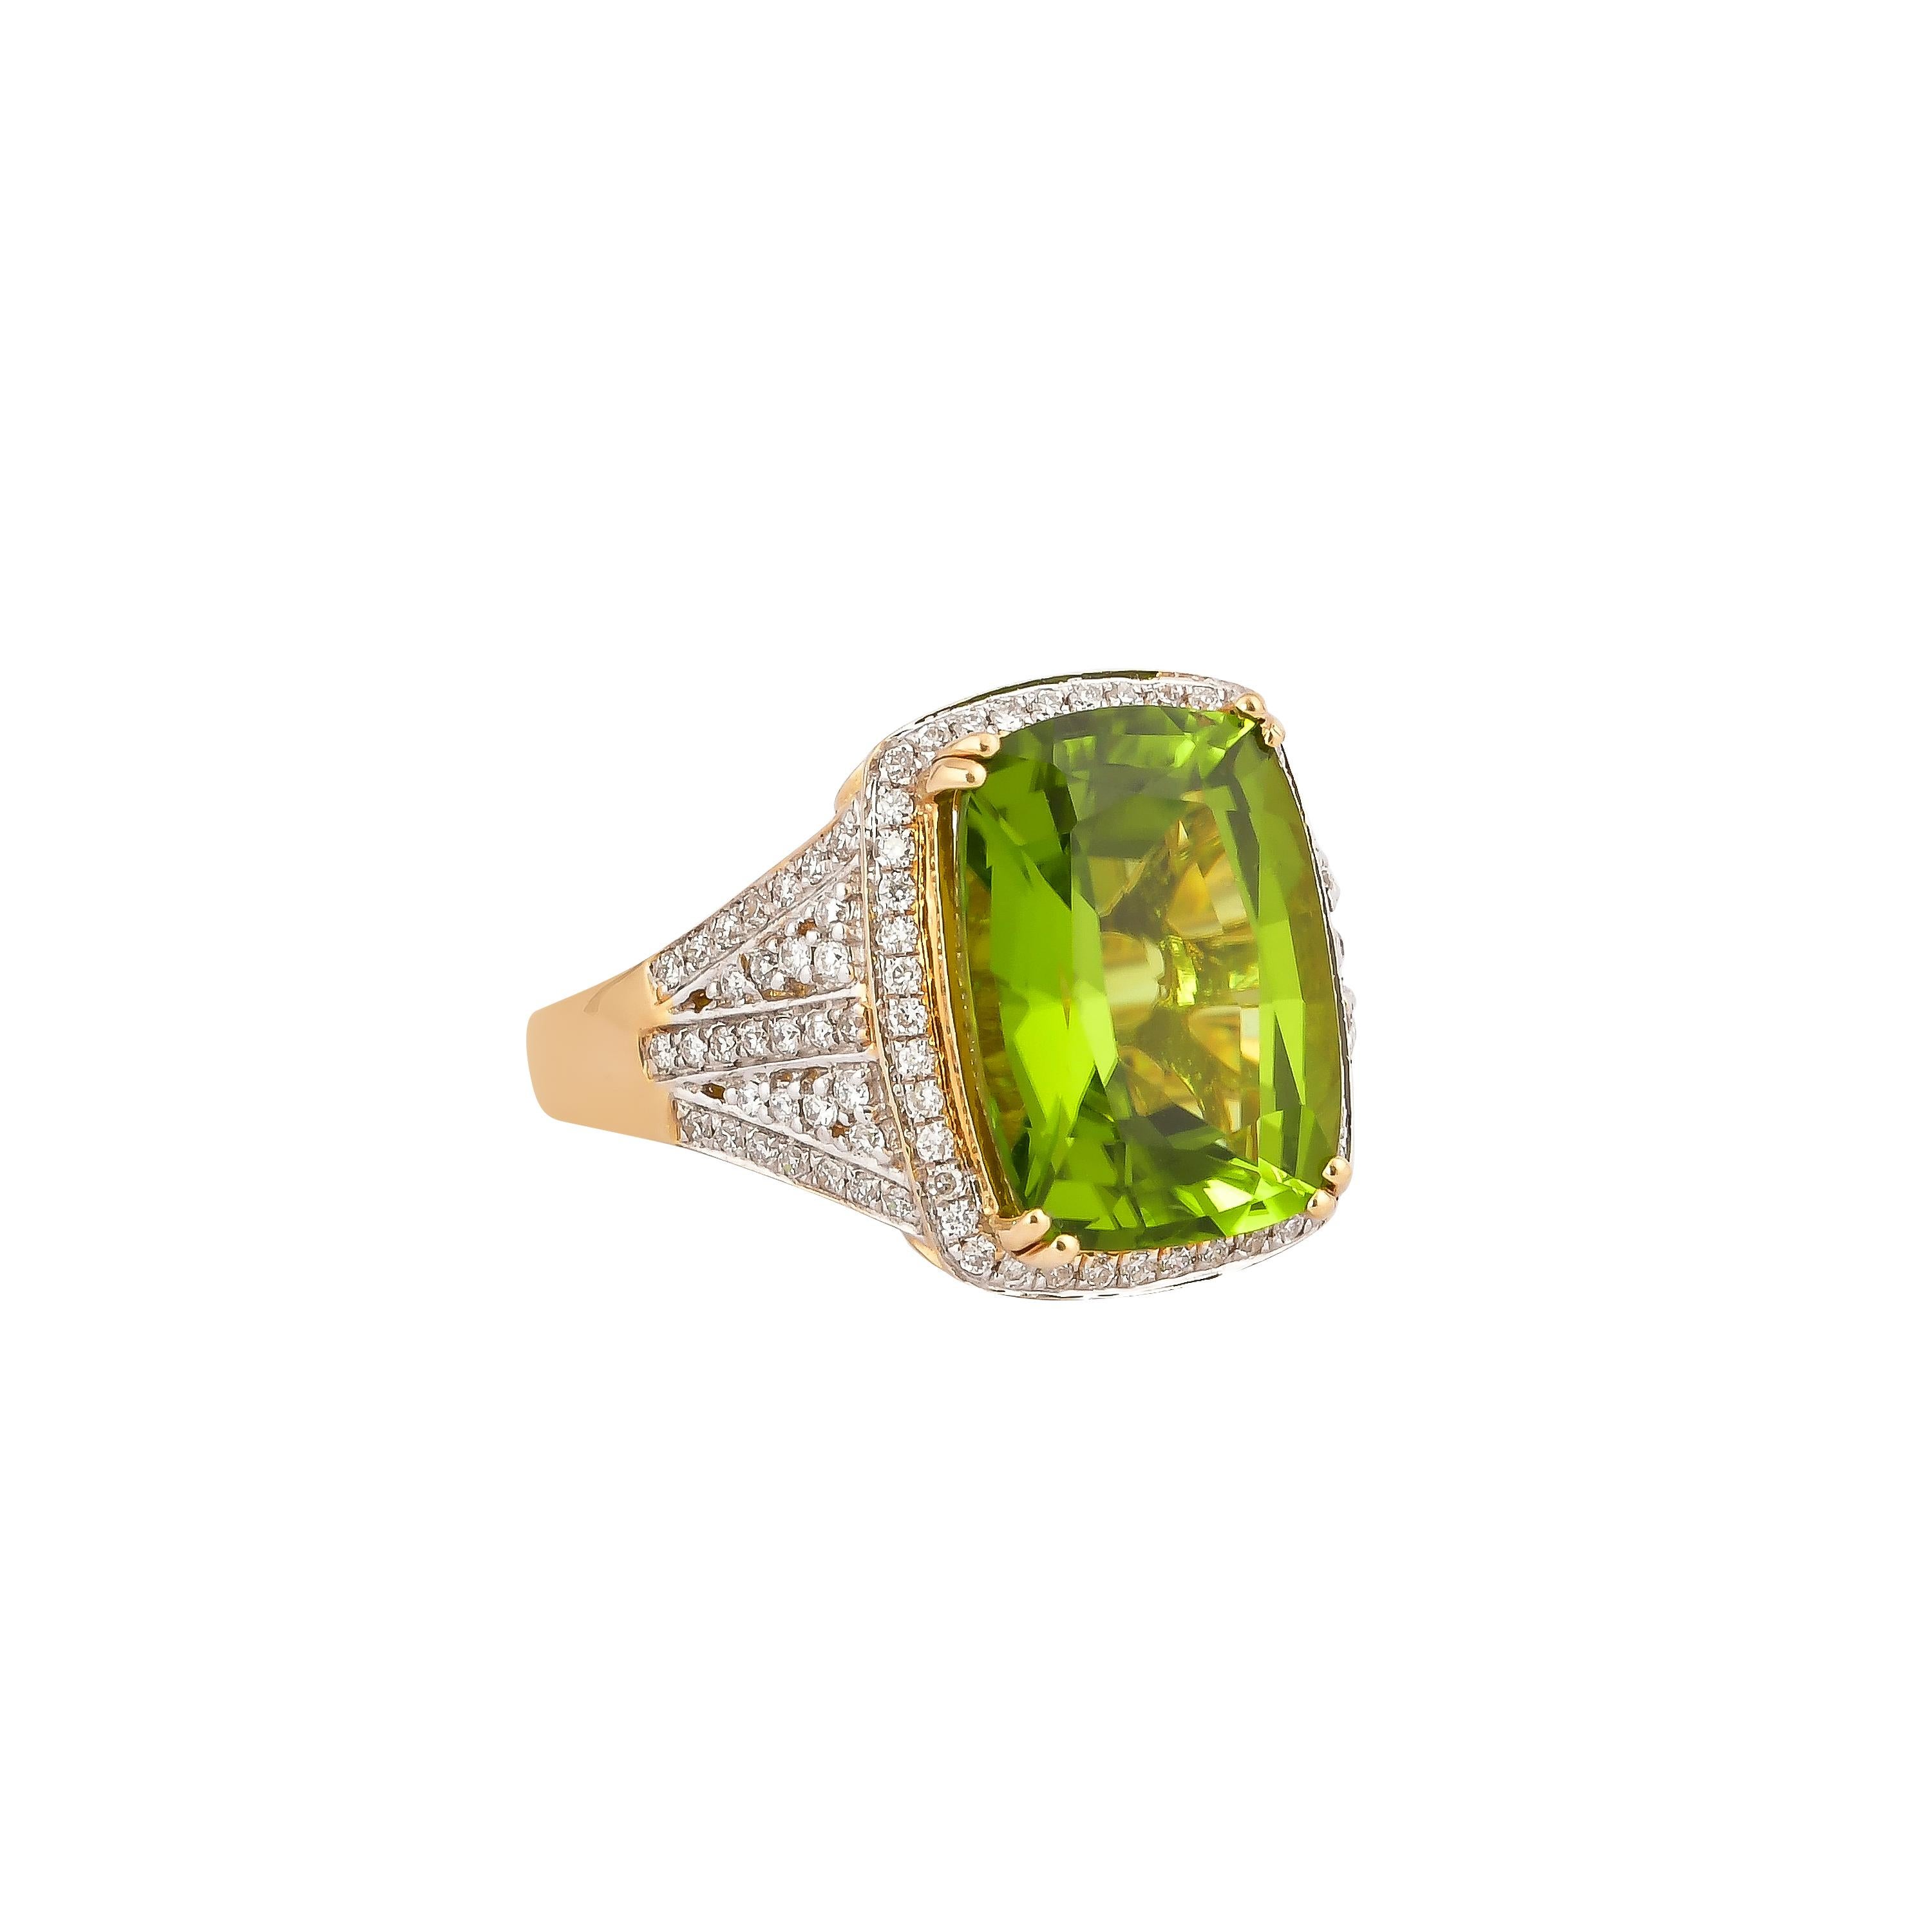 This collection features an array of pretty peridot rings! Accented with diamonds these rings are made in yellow gold and present a vibrant and fresh look. 

Classic peridot ring in 18K yellow gold with diamonds. 

Peridot: 6.520 carat cushion